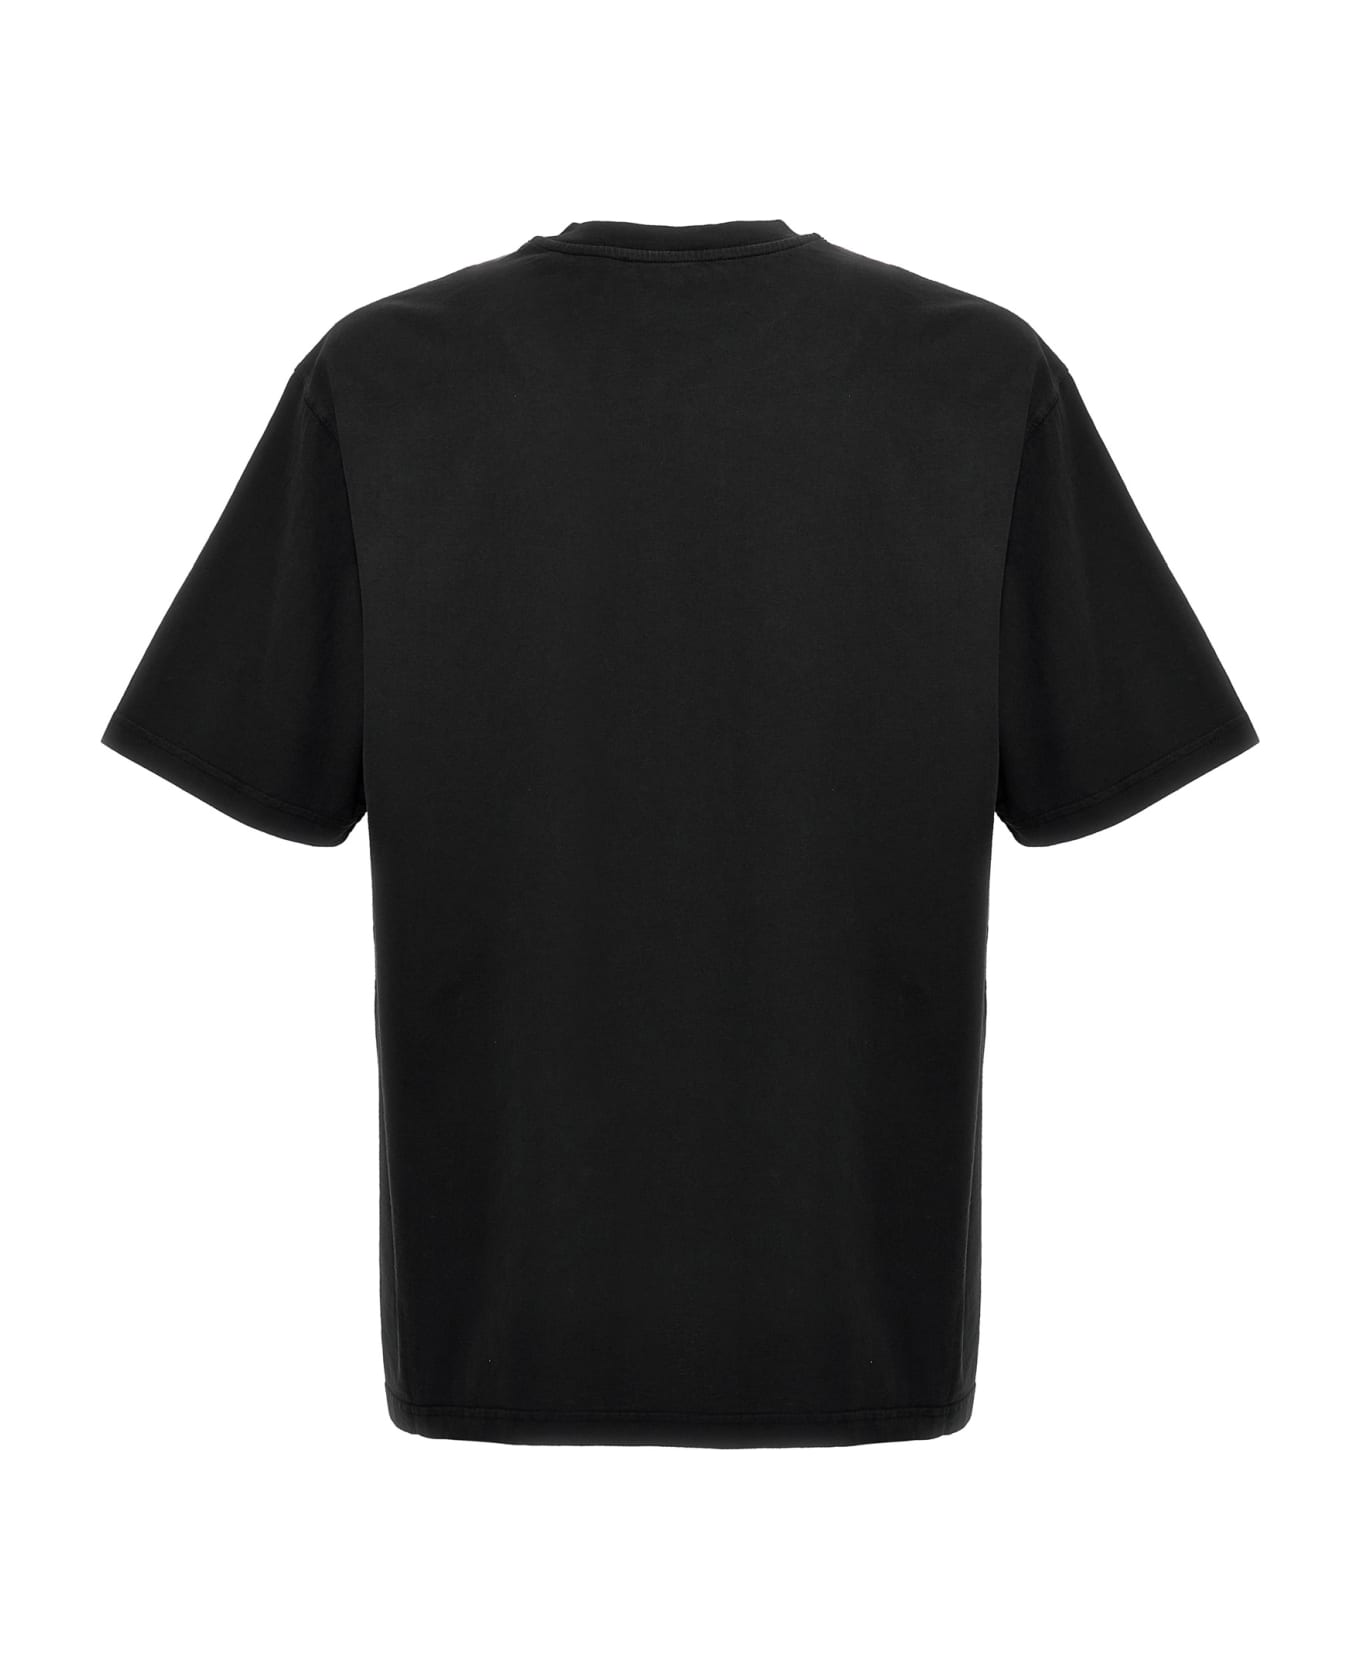 A-COLD-WALL 'essential' T-shirt - Black  